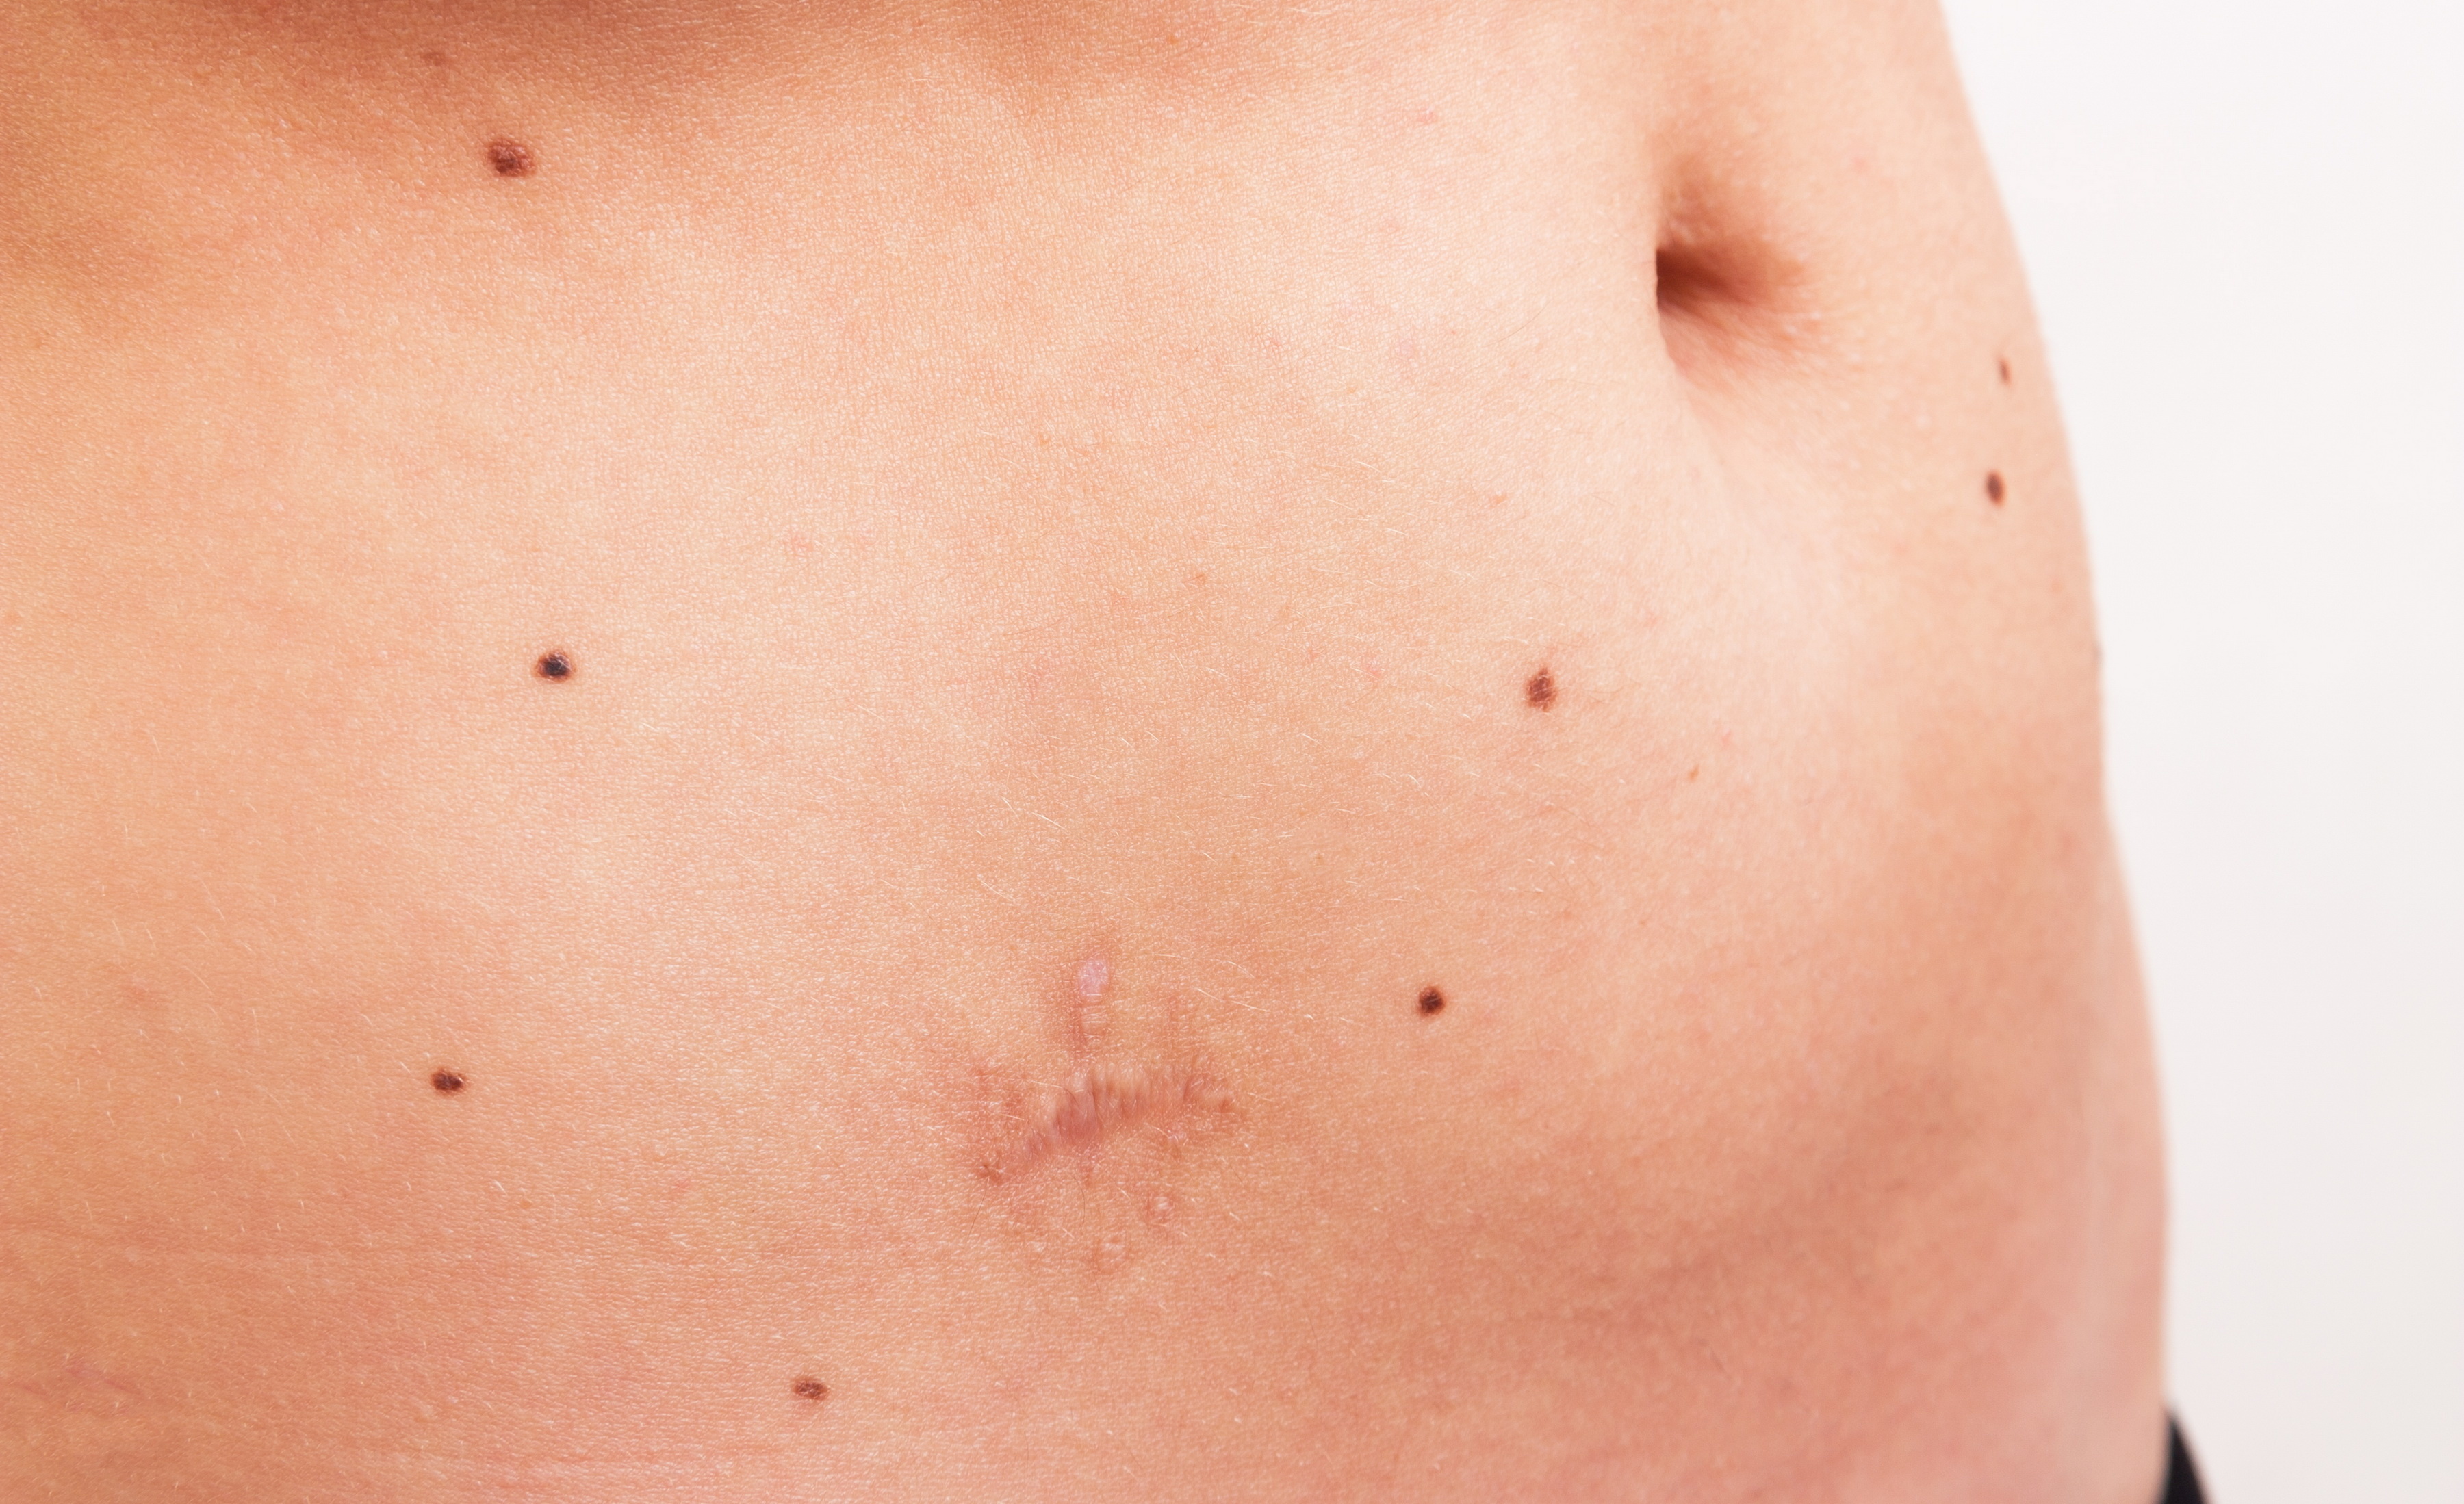 NYC Dermatologist Shares Her Top Considerations in Cosmetic Mole Removal -  Wall Street Dermatology